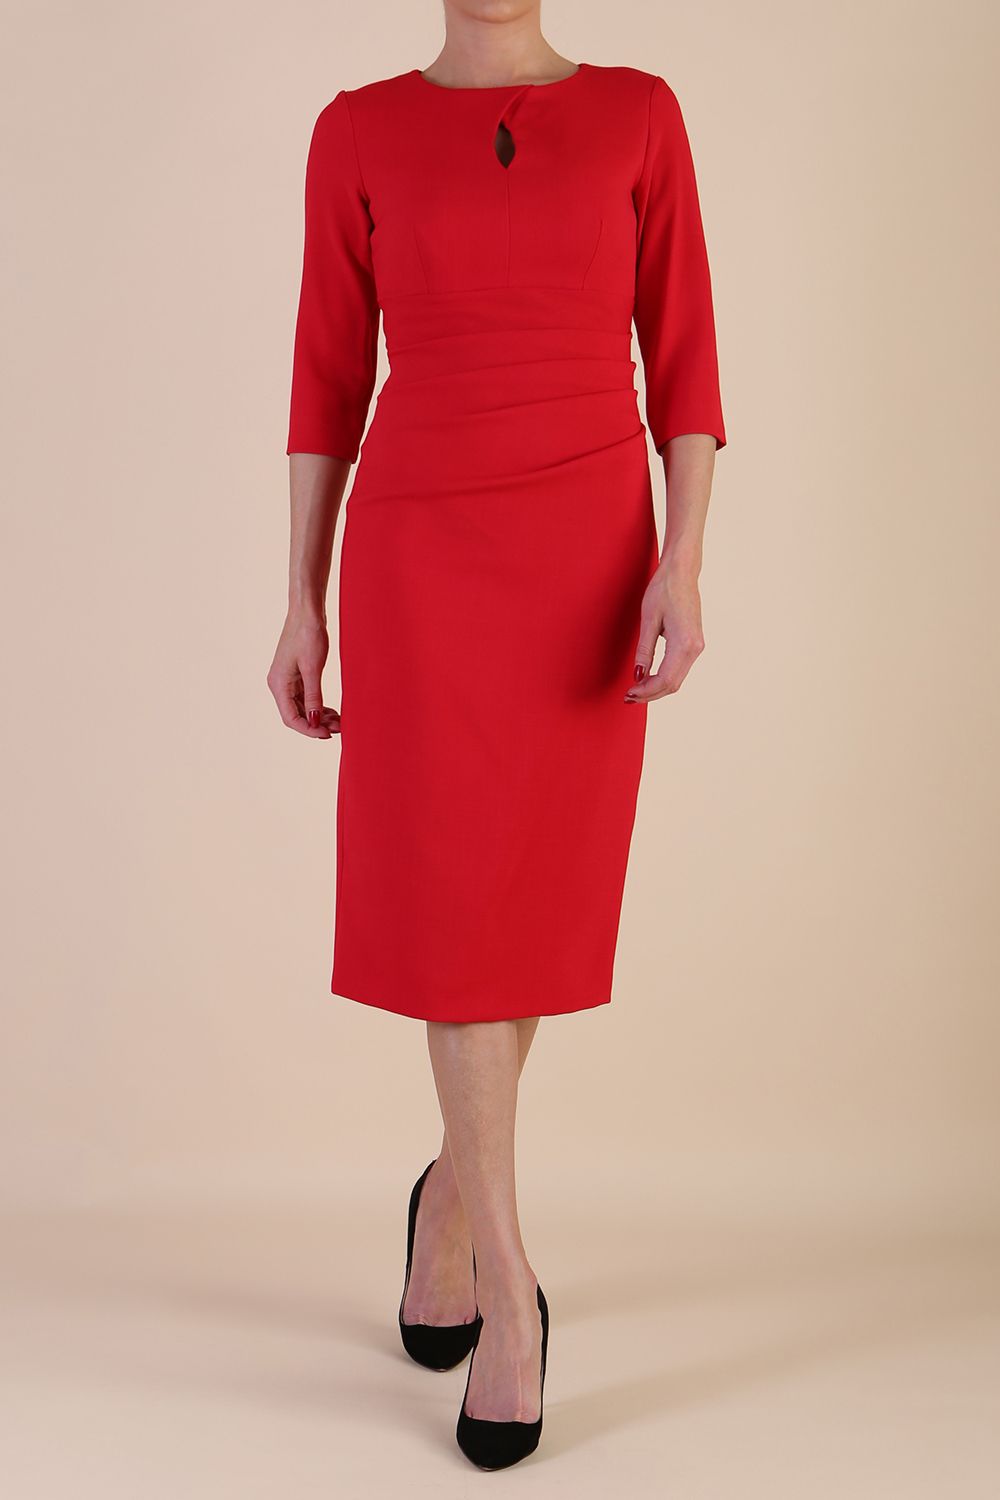 model wearing diva catwalk ubrique pencil dress with a keyhole detail and sleeves in scarlet red